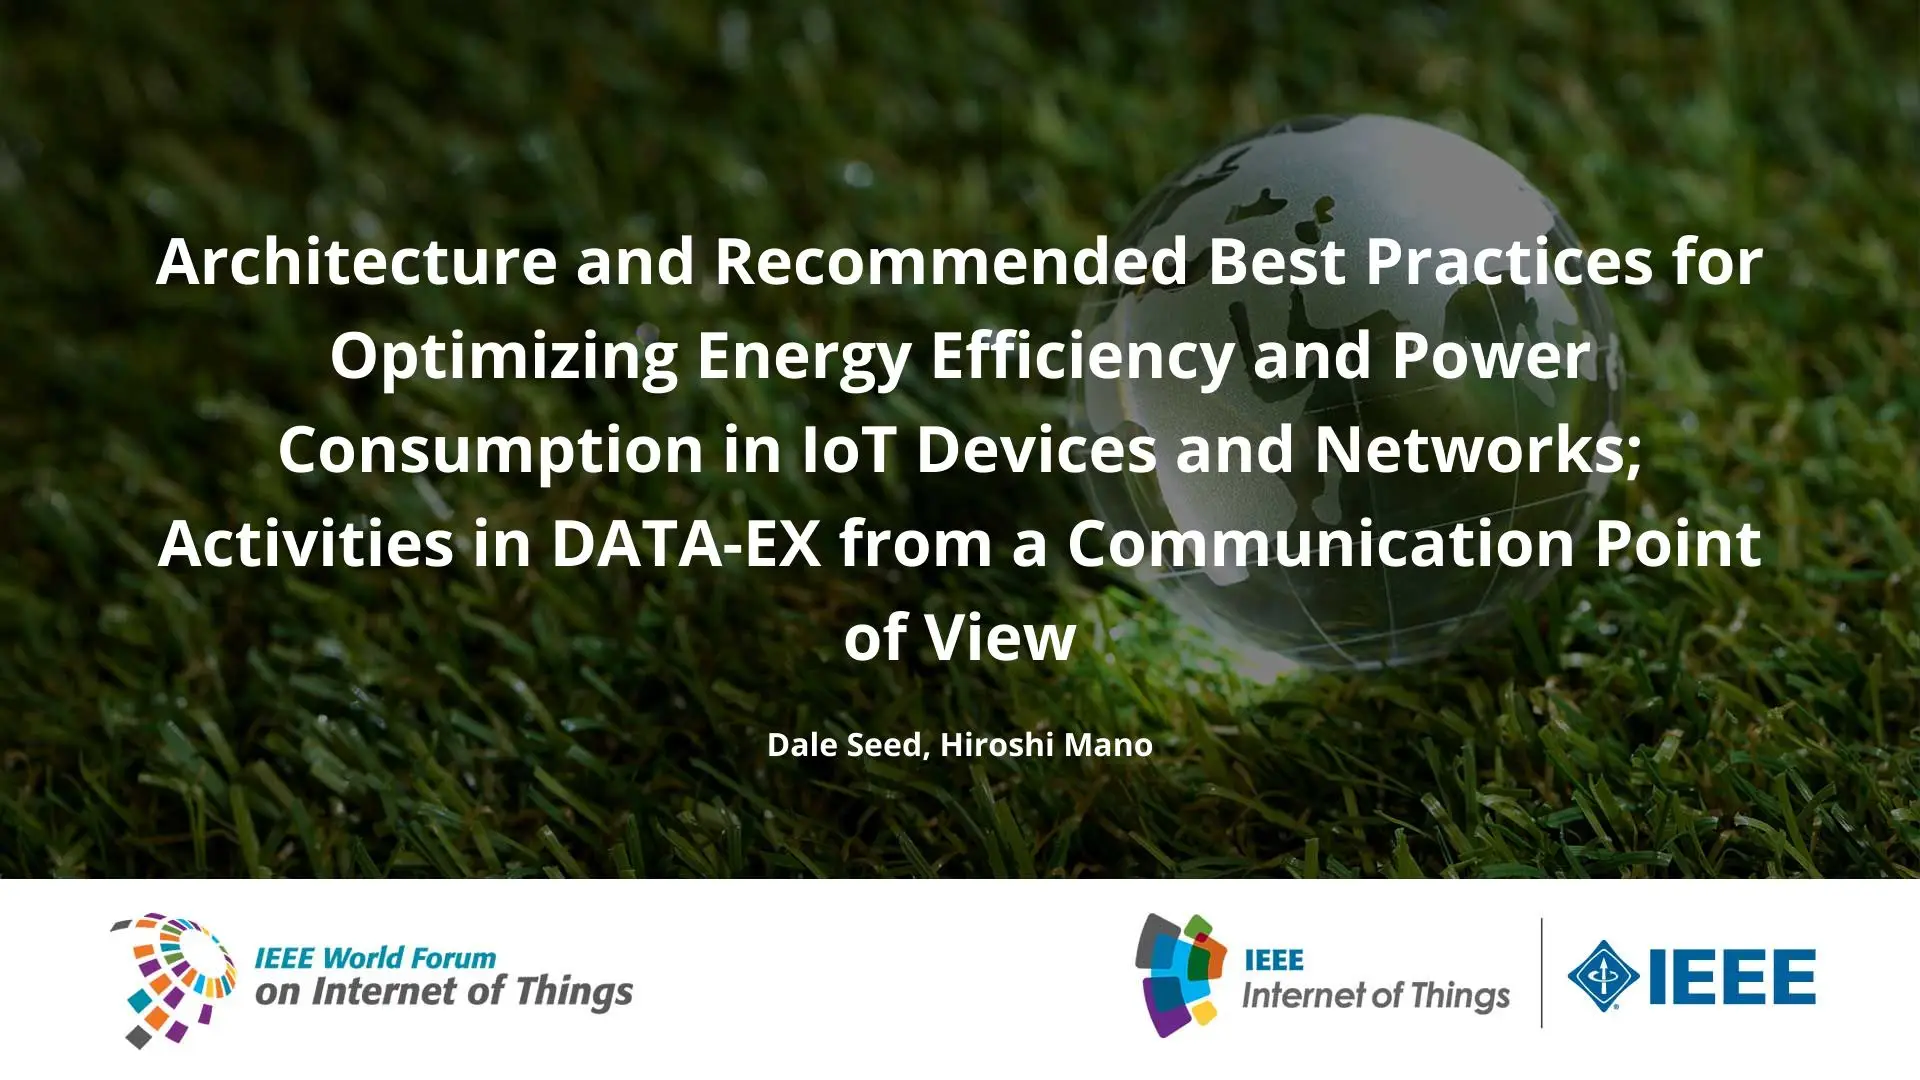 Architecture and Recommended Best Practices for Optimizing Energy Efficiency and Power Consumption in IoT Devices and Networks; Activities in DATA-EX from a Communication Point of View